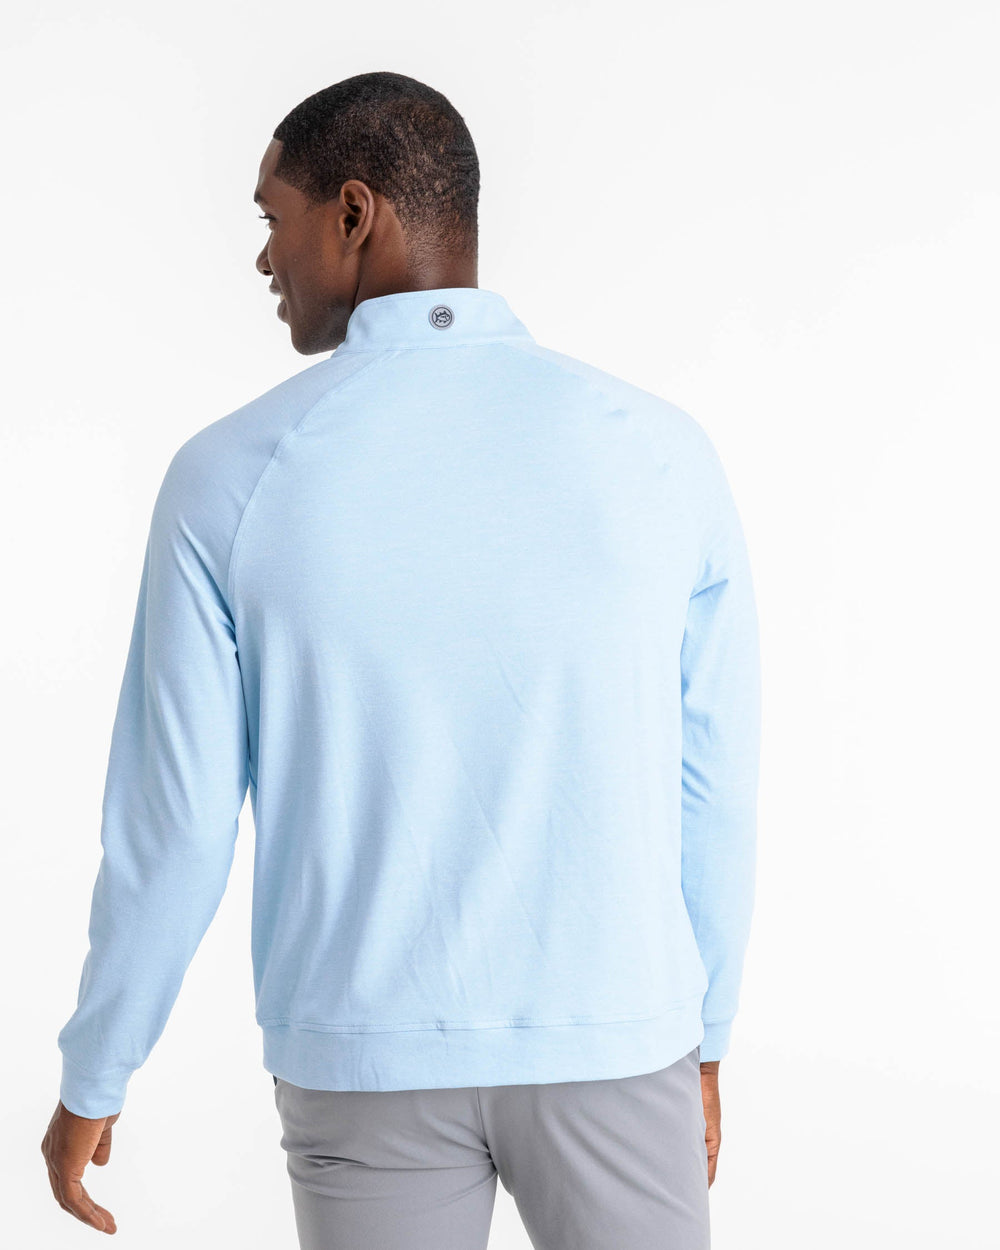 The back view of the Backbarrier Heather Performance Quarter Zip Pullover by Southern Tide - Heather Aquamarine